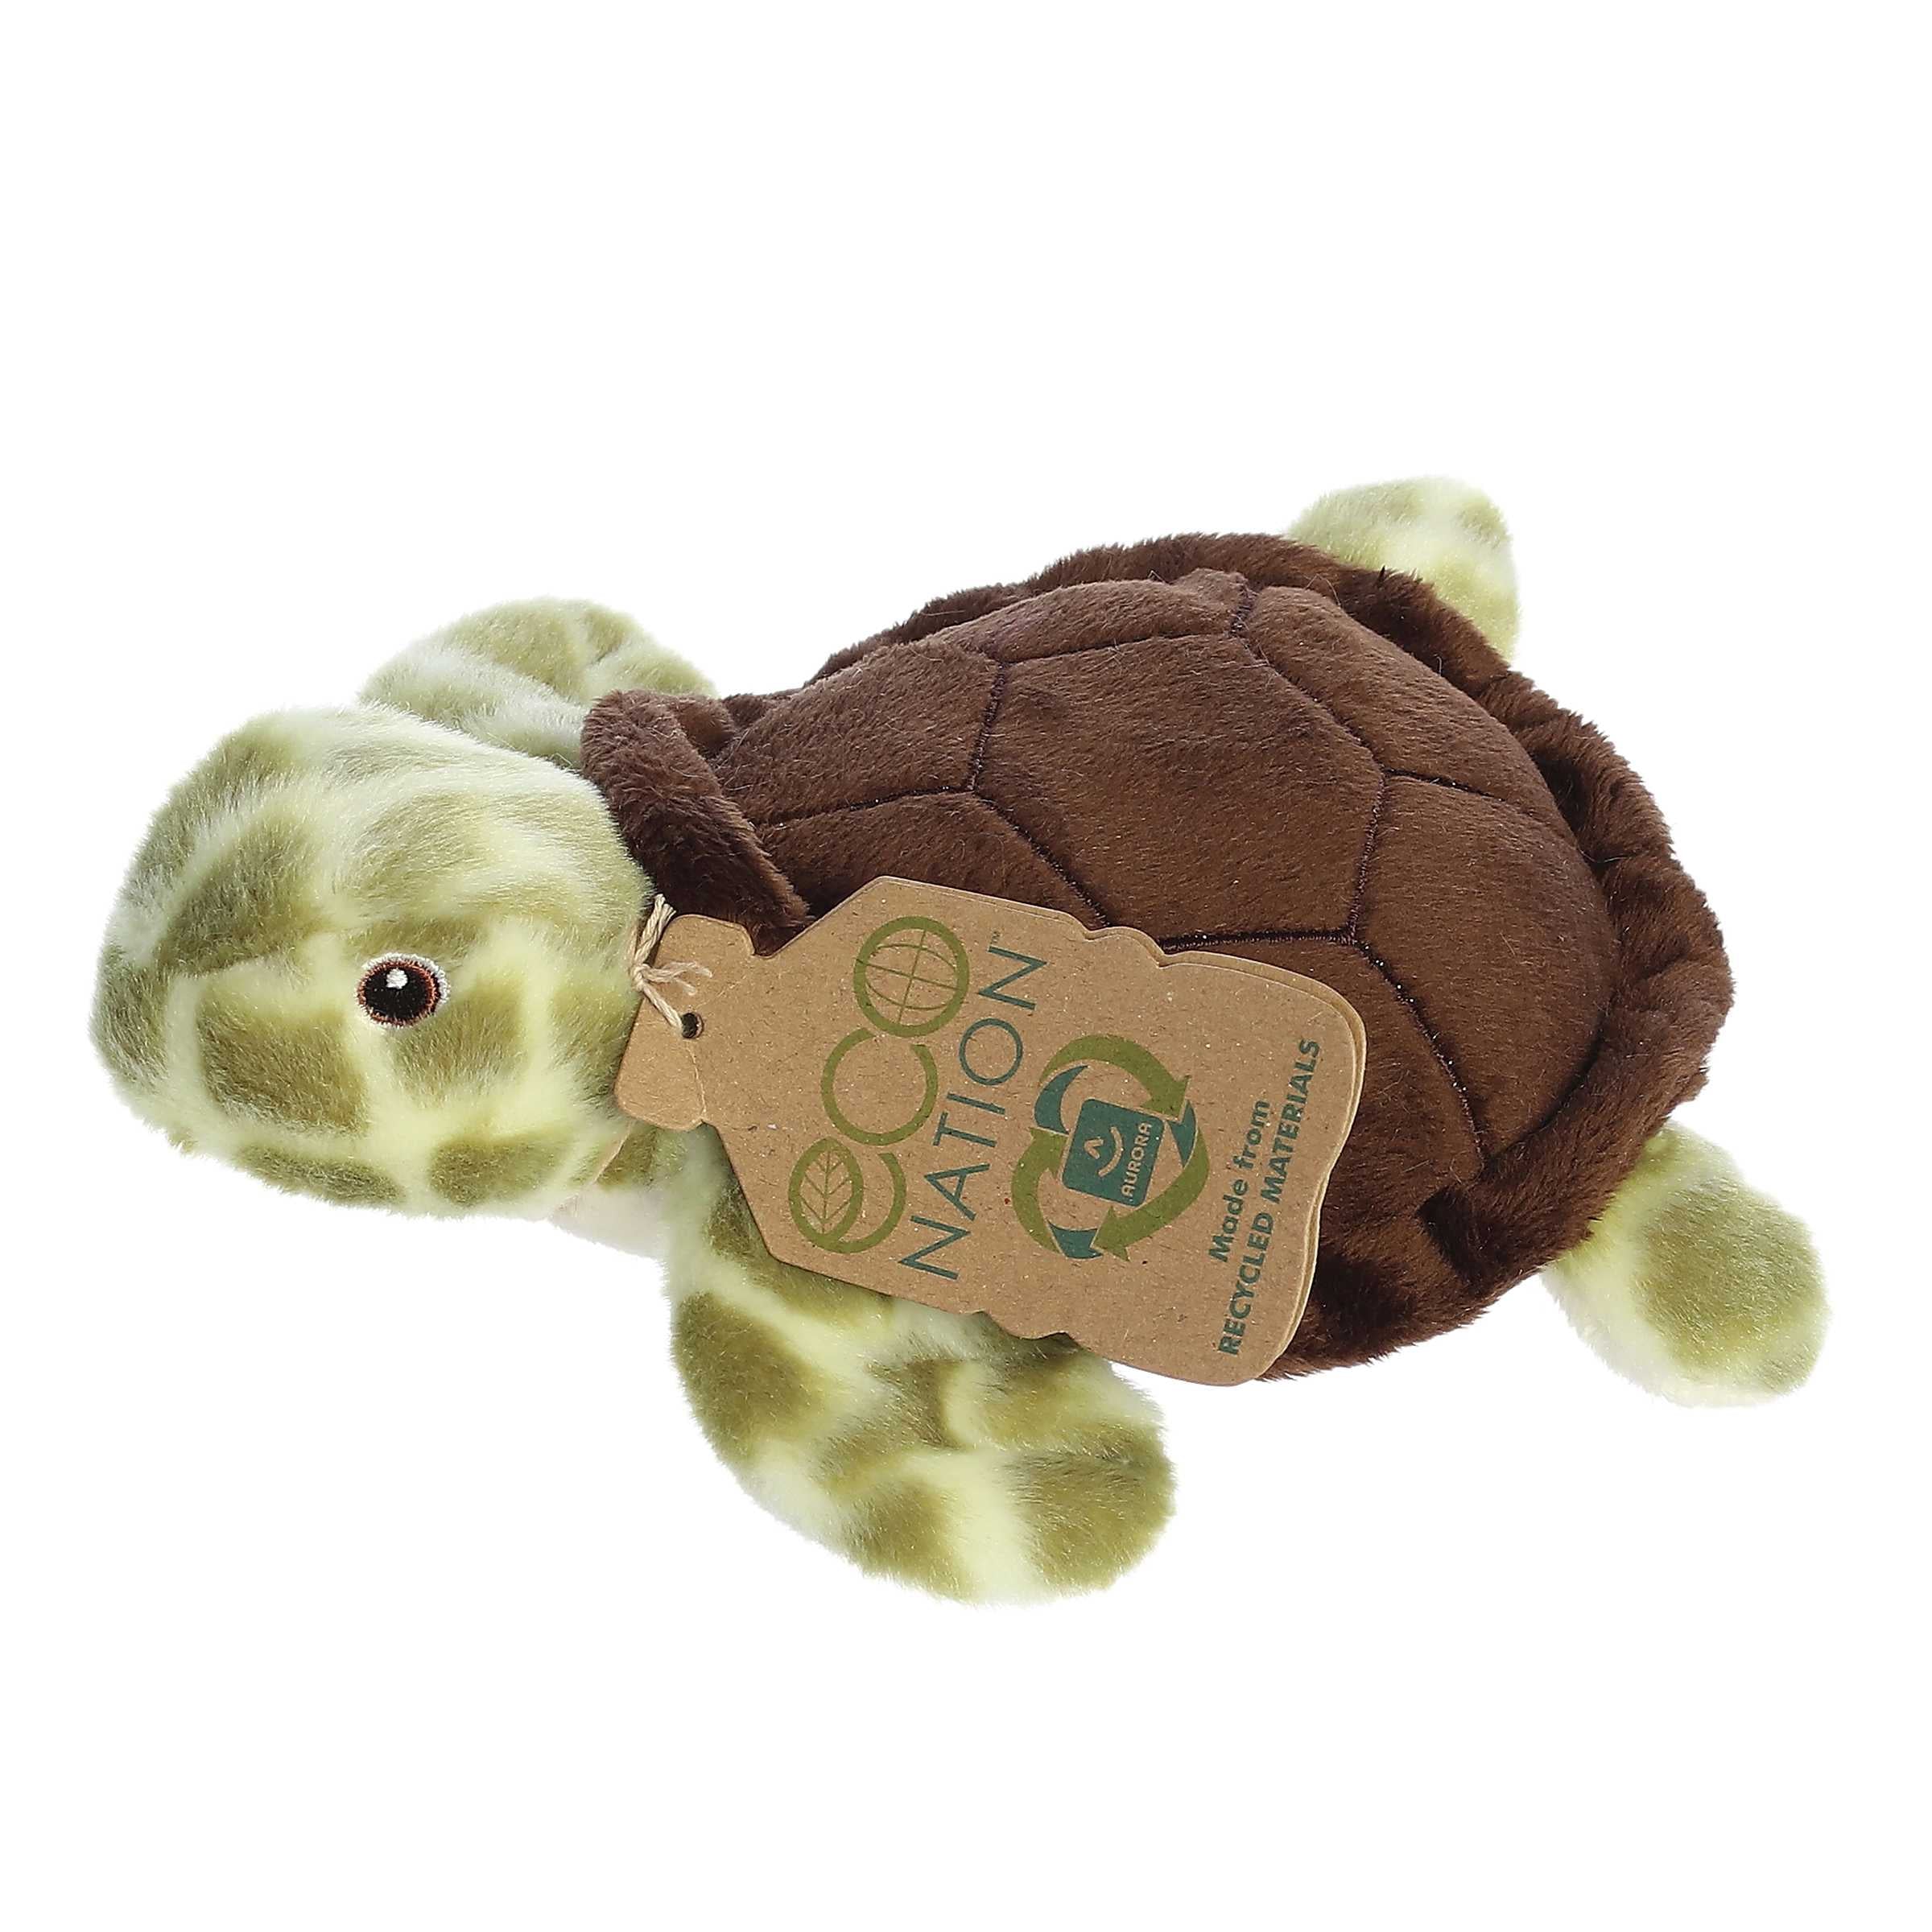 Eco Softie Sea Turtle Plush, green and brown, made from recycled materials, with a hang tag symbolizing sustainable choices.